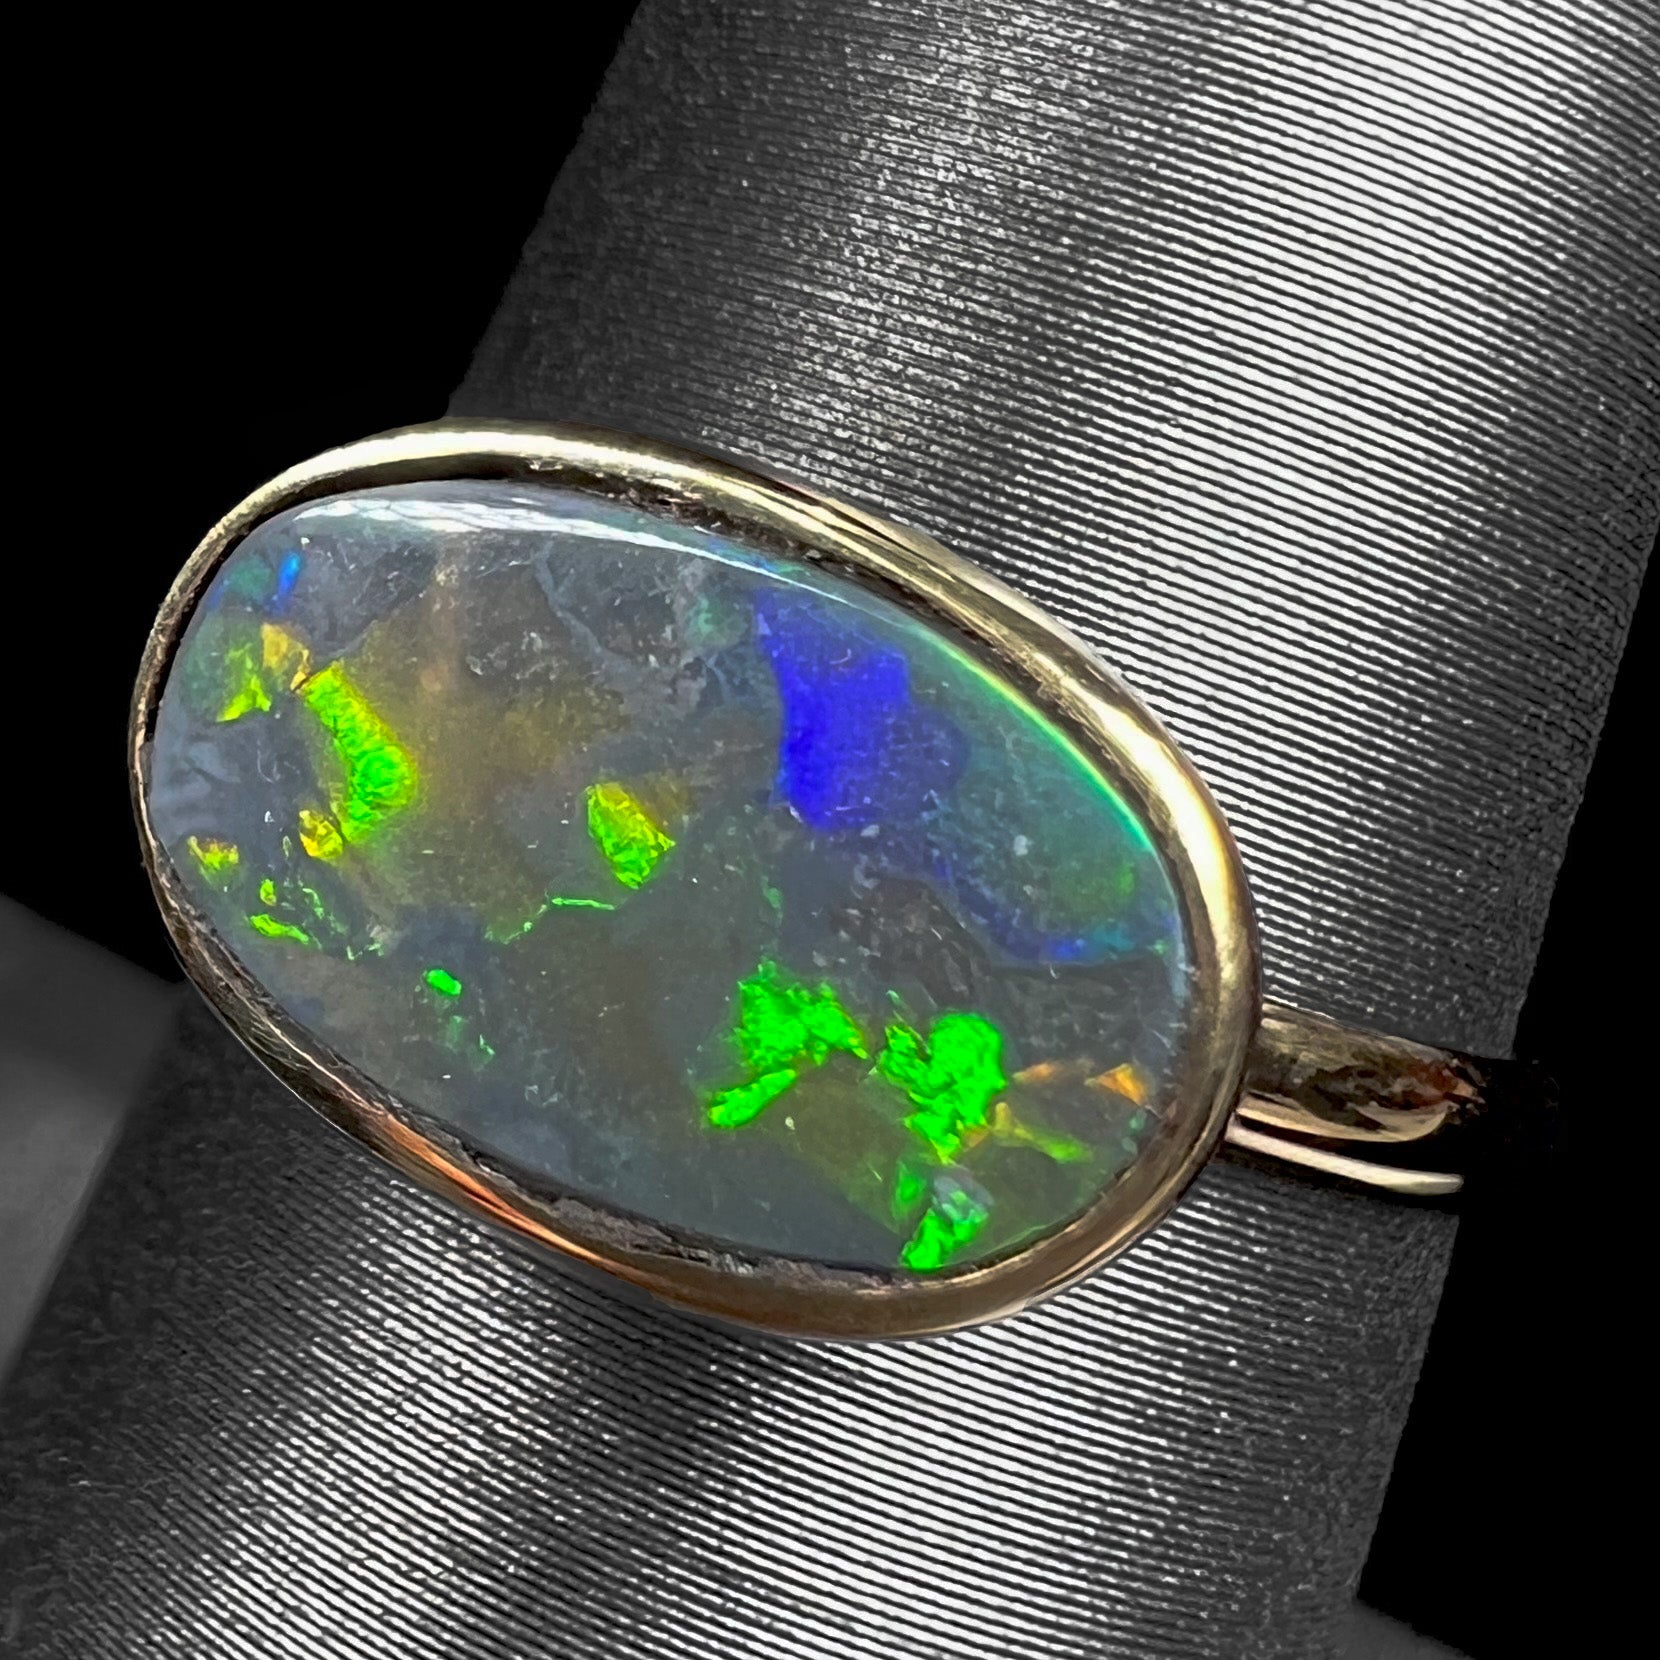 A ladies' yellow gold black opal solitaire ring from Lightning Ridge, Australia.